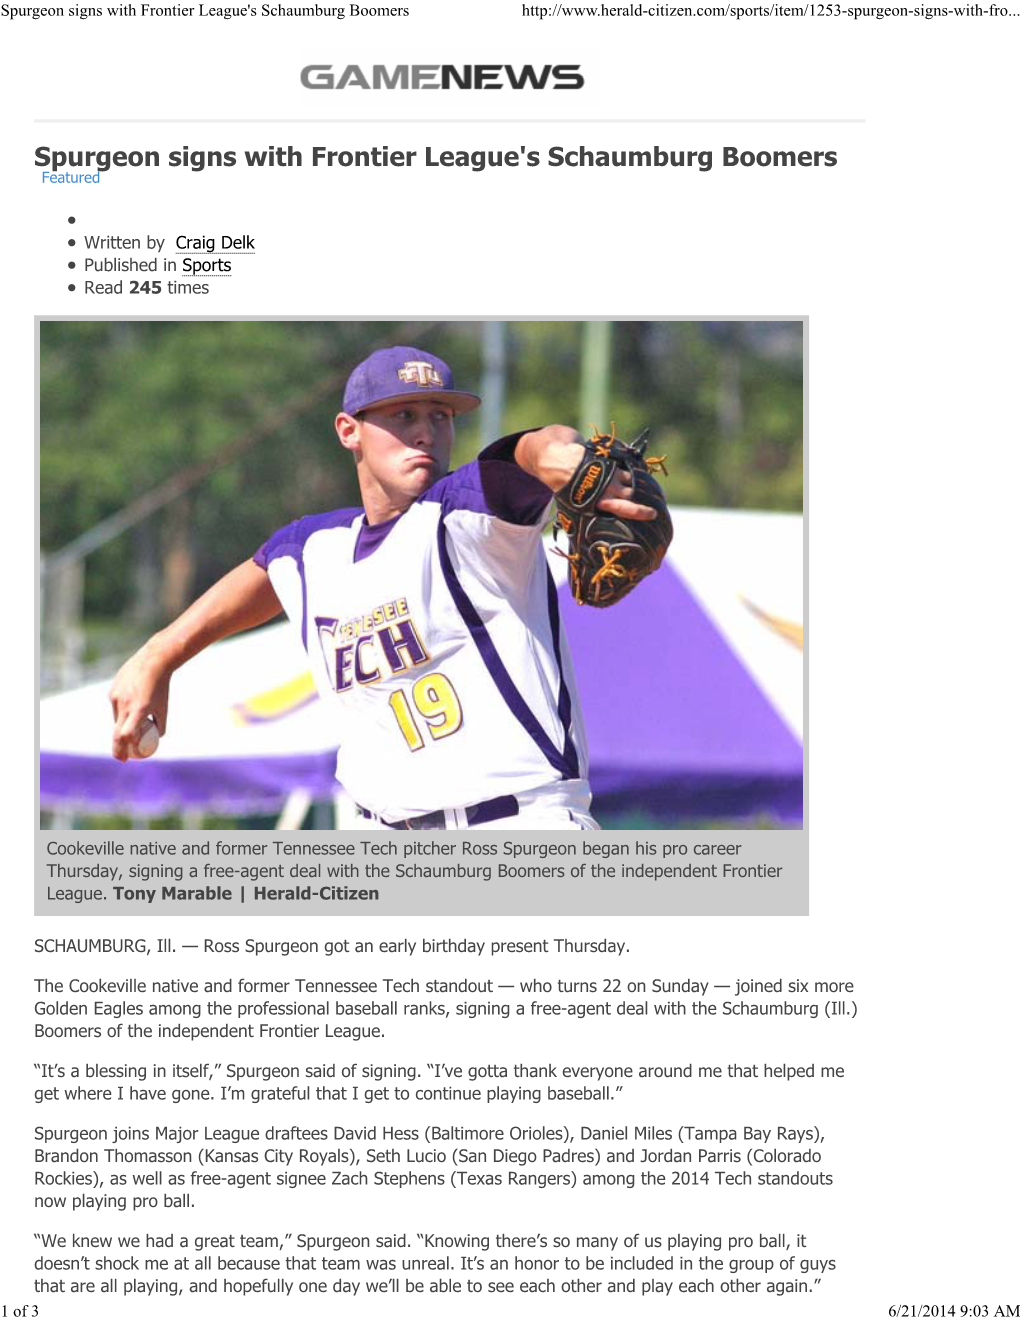 Spurgeon Signs with Frontier League's Schaumburg Boomers